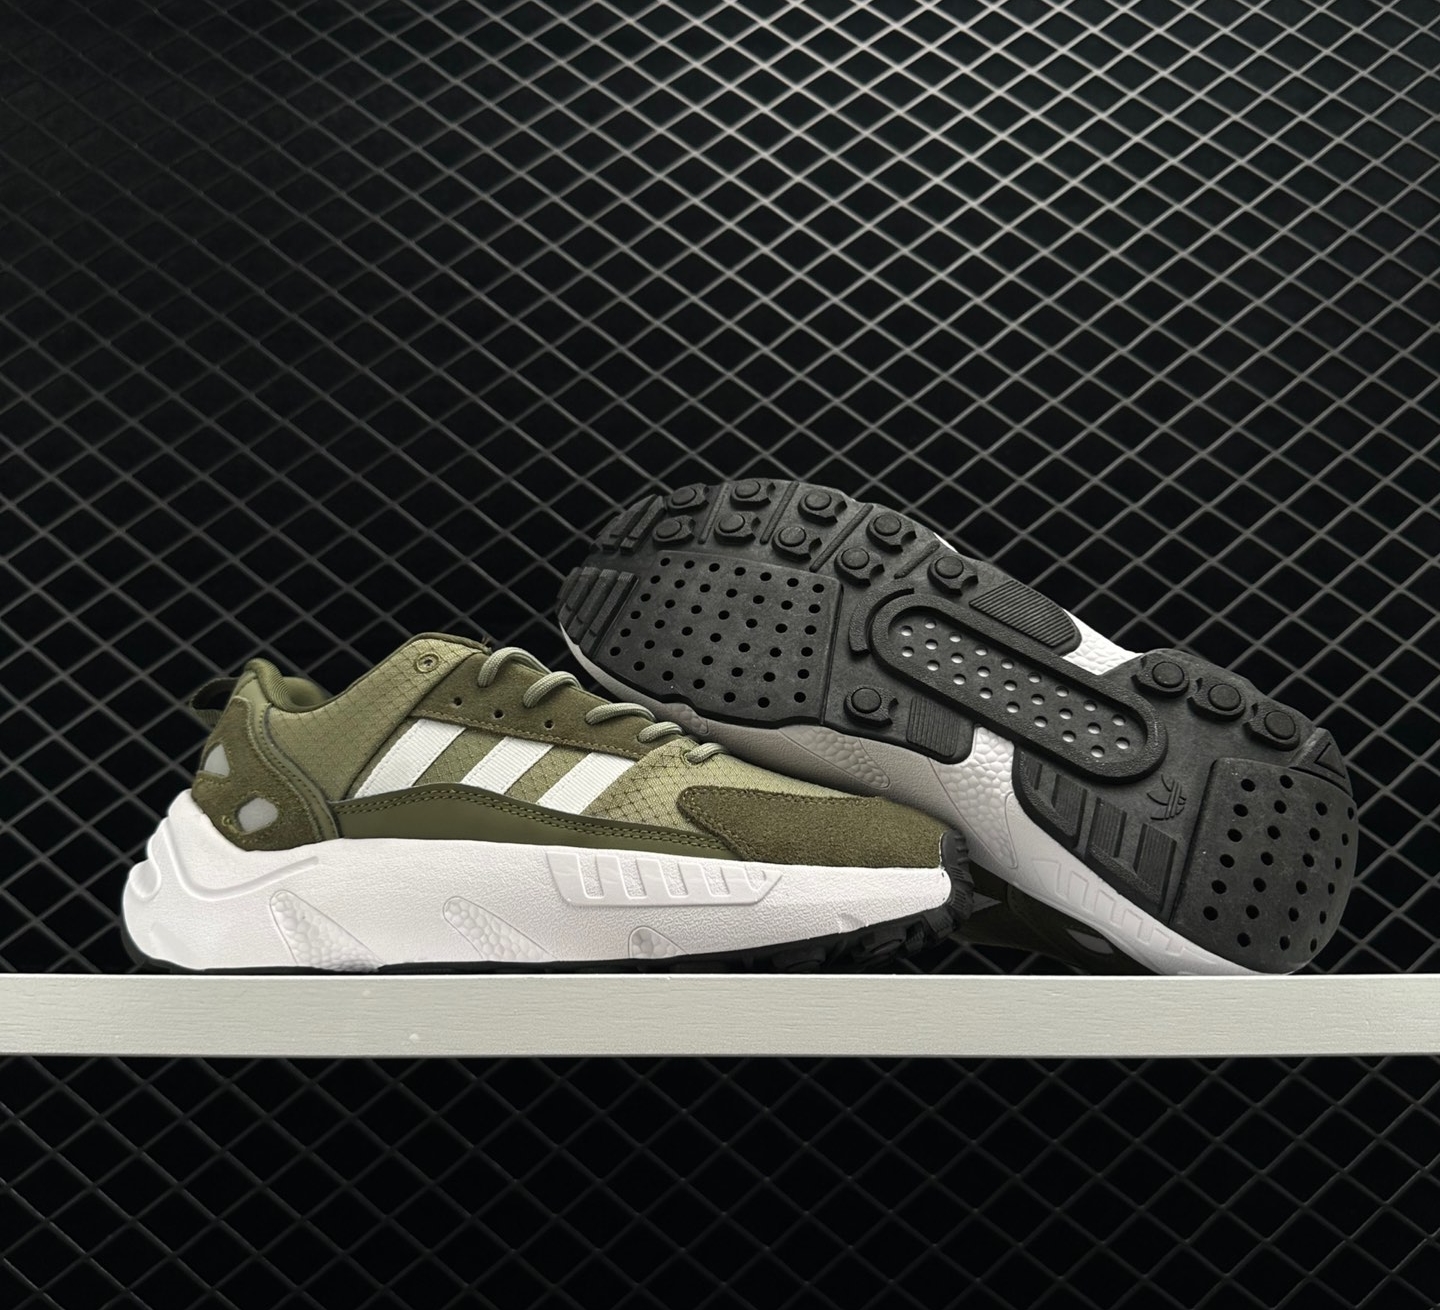 Adidas Originals ZX 22 Boost Green White GX2040 - Stylish and Comfortable Sneakers